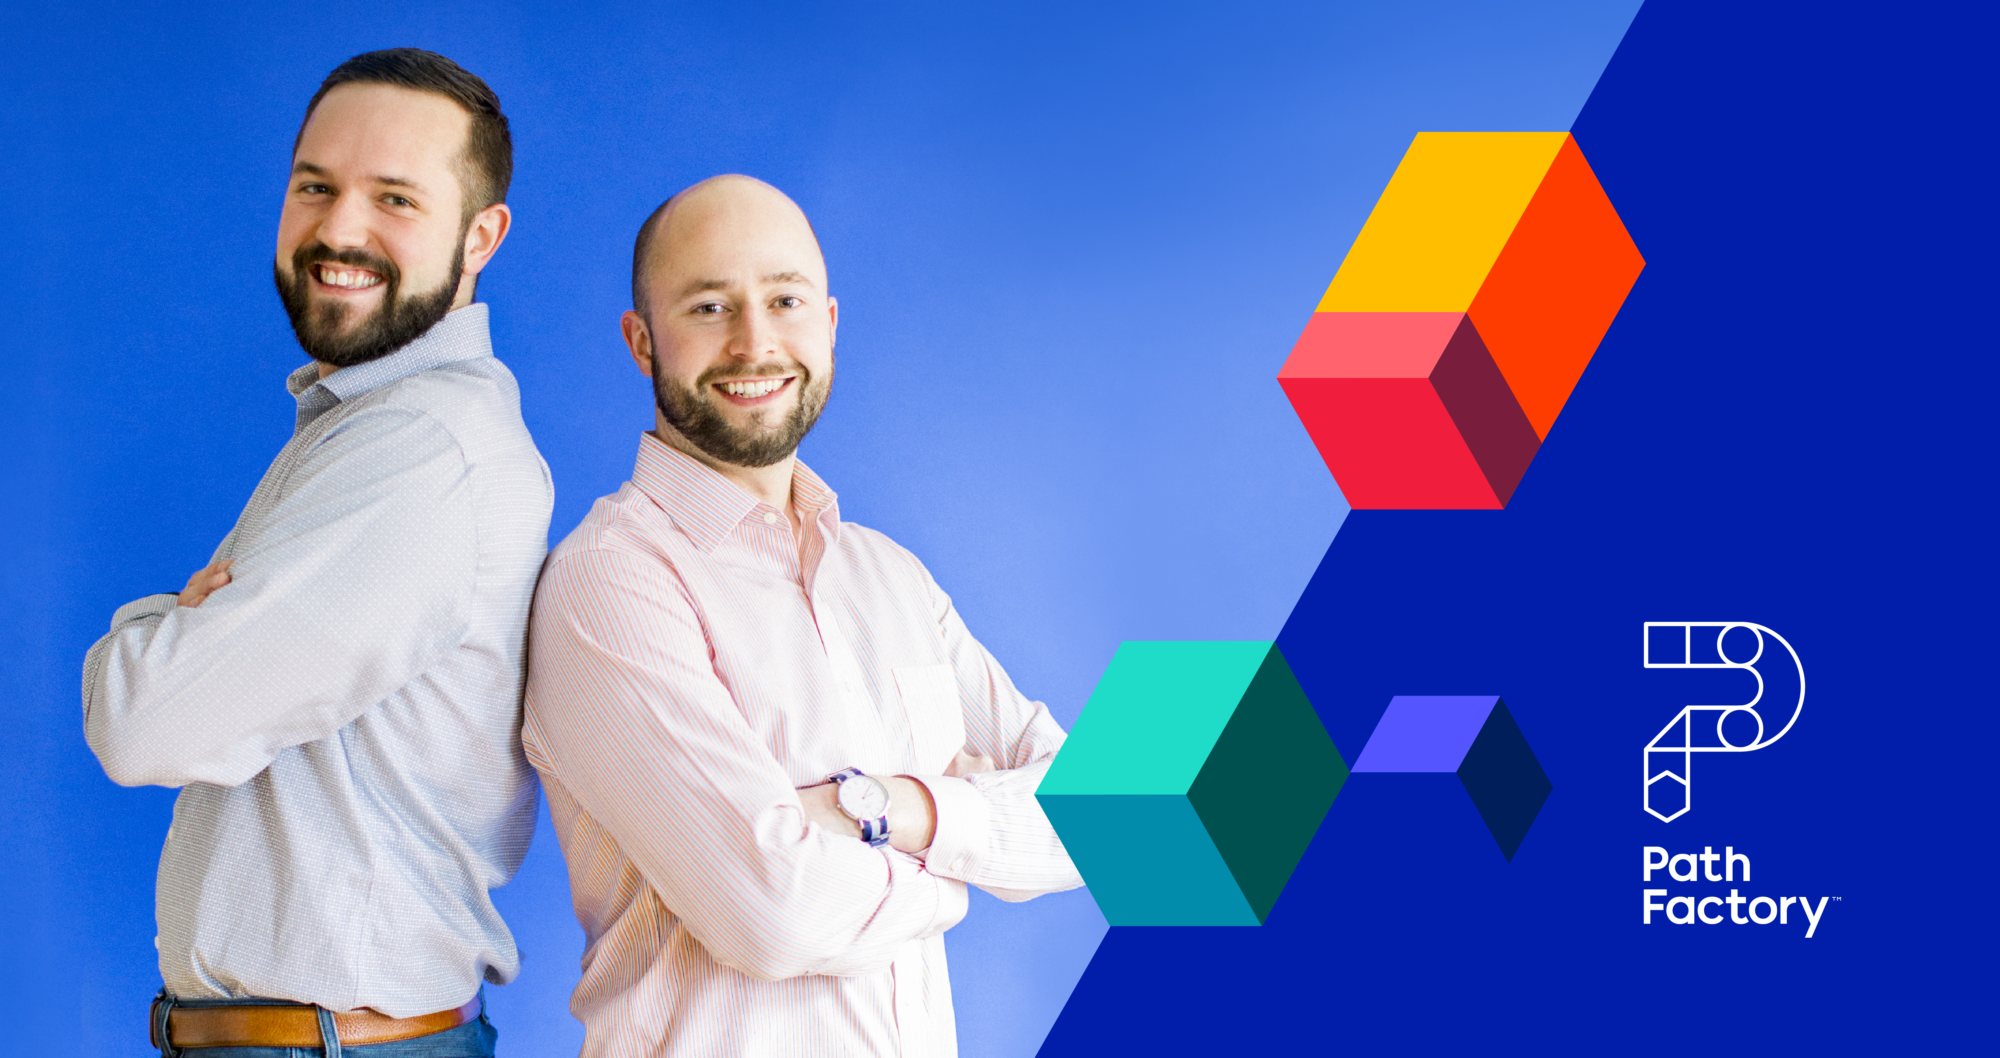 Header Image showing two gentlemen in shirts back to back leaning against each other smiling with a dark blue background and block shapes with PathFactory's logo in the bottom right